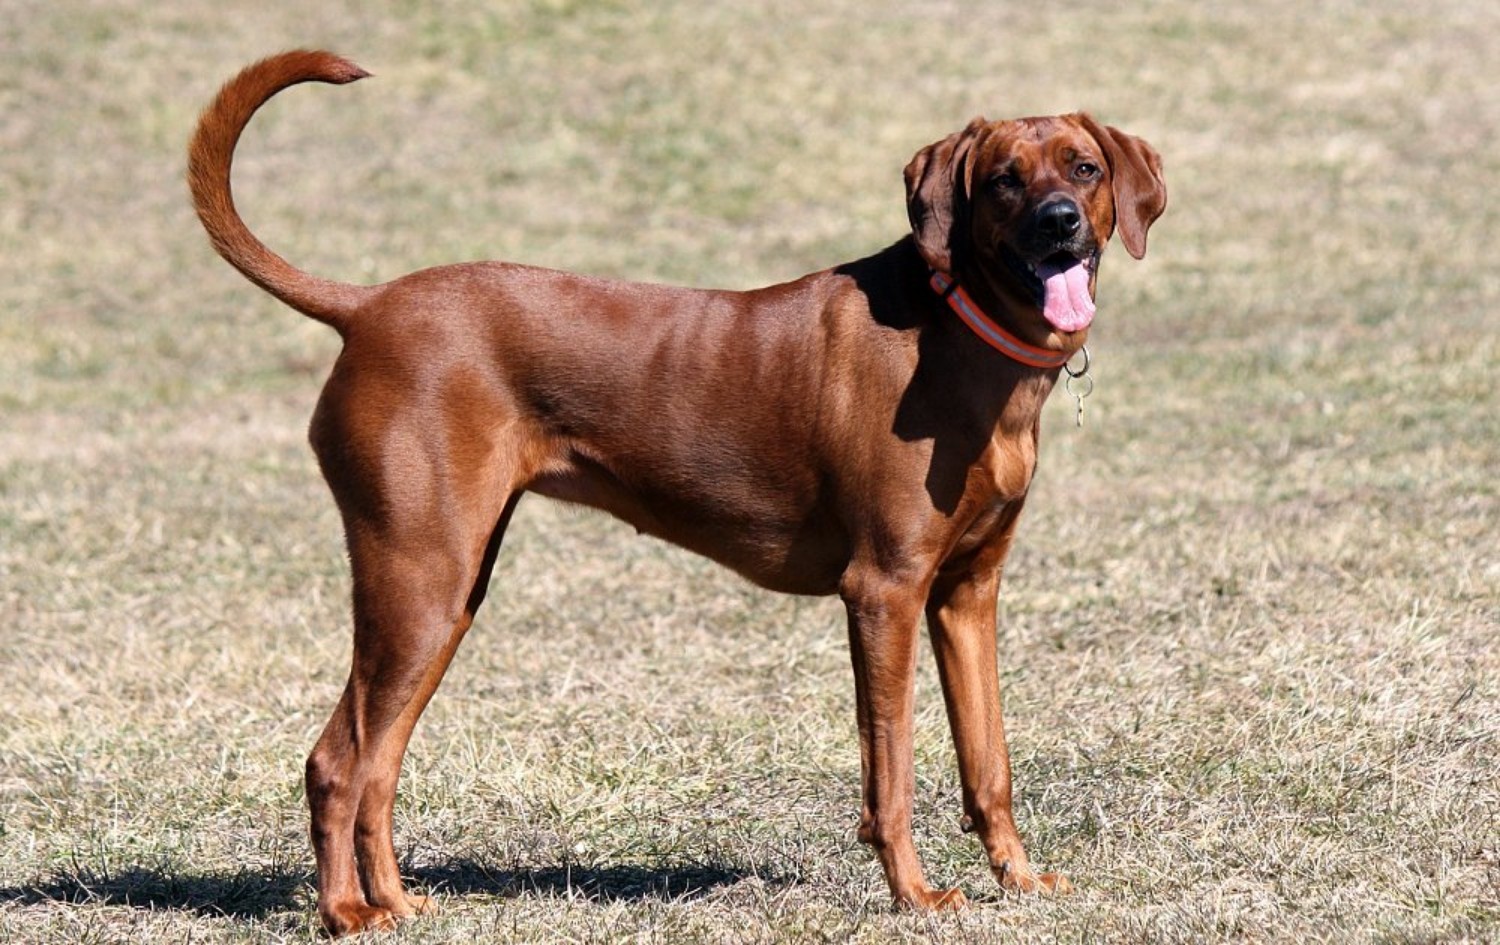 Coonhound Dog Breed Information, Images, Characteristics, Health